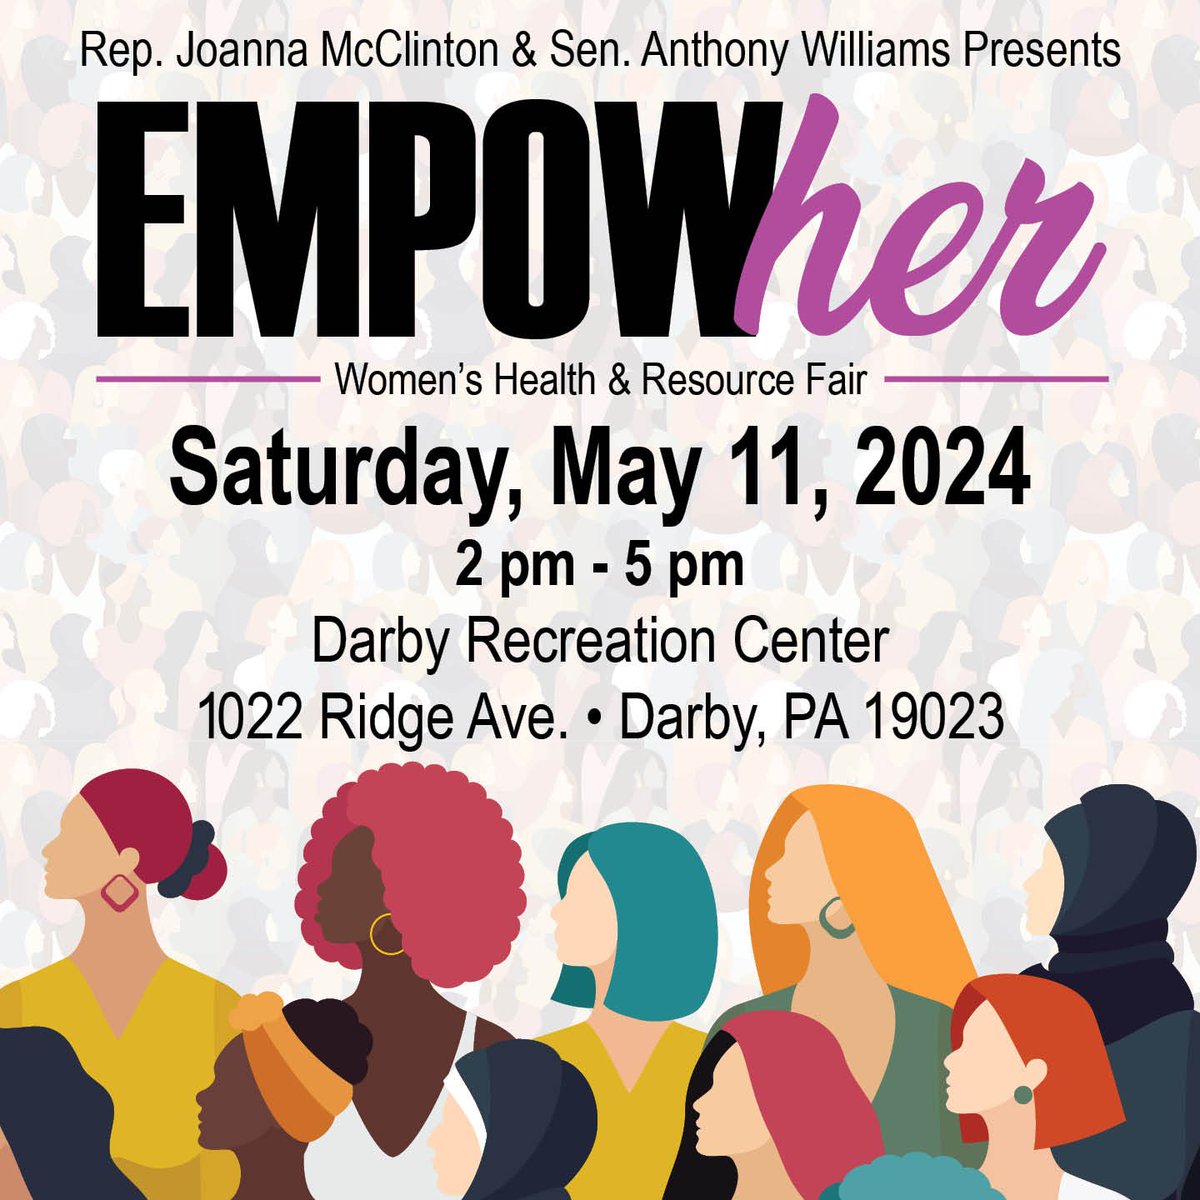 #DelCo neighbors - Join @SenTonyWilliams & I next Saturday, May 11, 2024, from 2 p.m. to 5 p.m. at the Darby Recreation Center, 1022 Ridge Ave., Darby, PA for the EmpowHER Women's Health and Resource Fair. RSVP by contacting my office at 215-748-6712 or forms.office.com/pages/response…